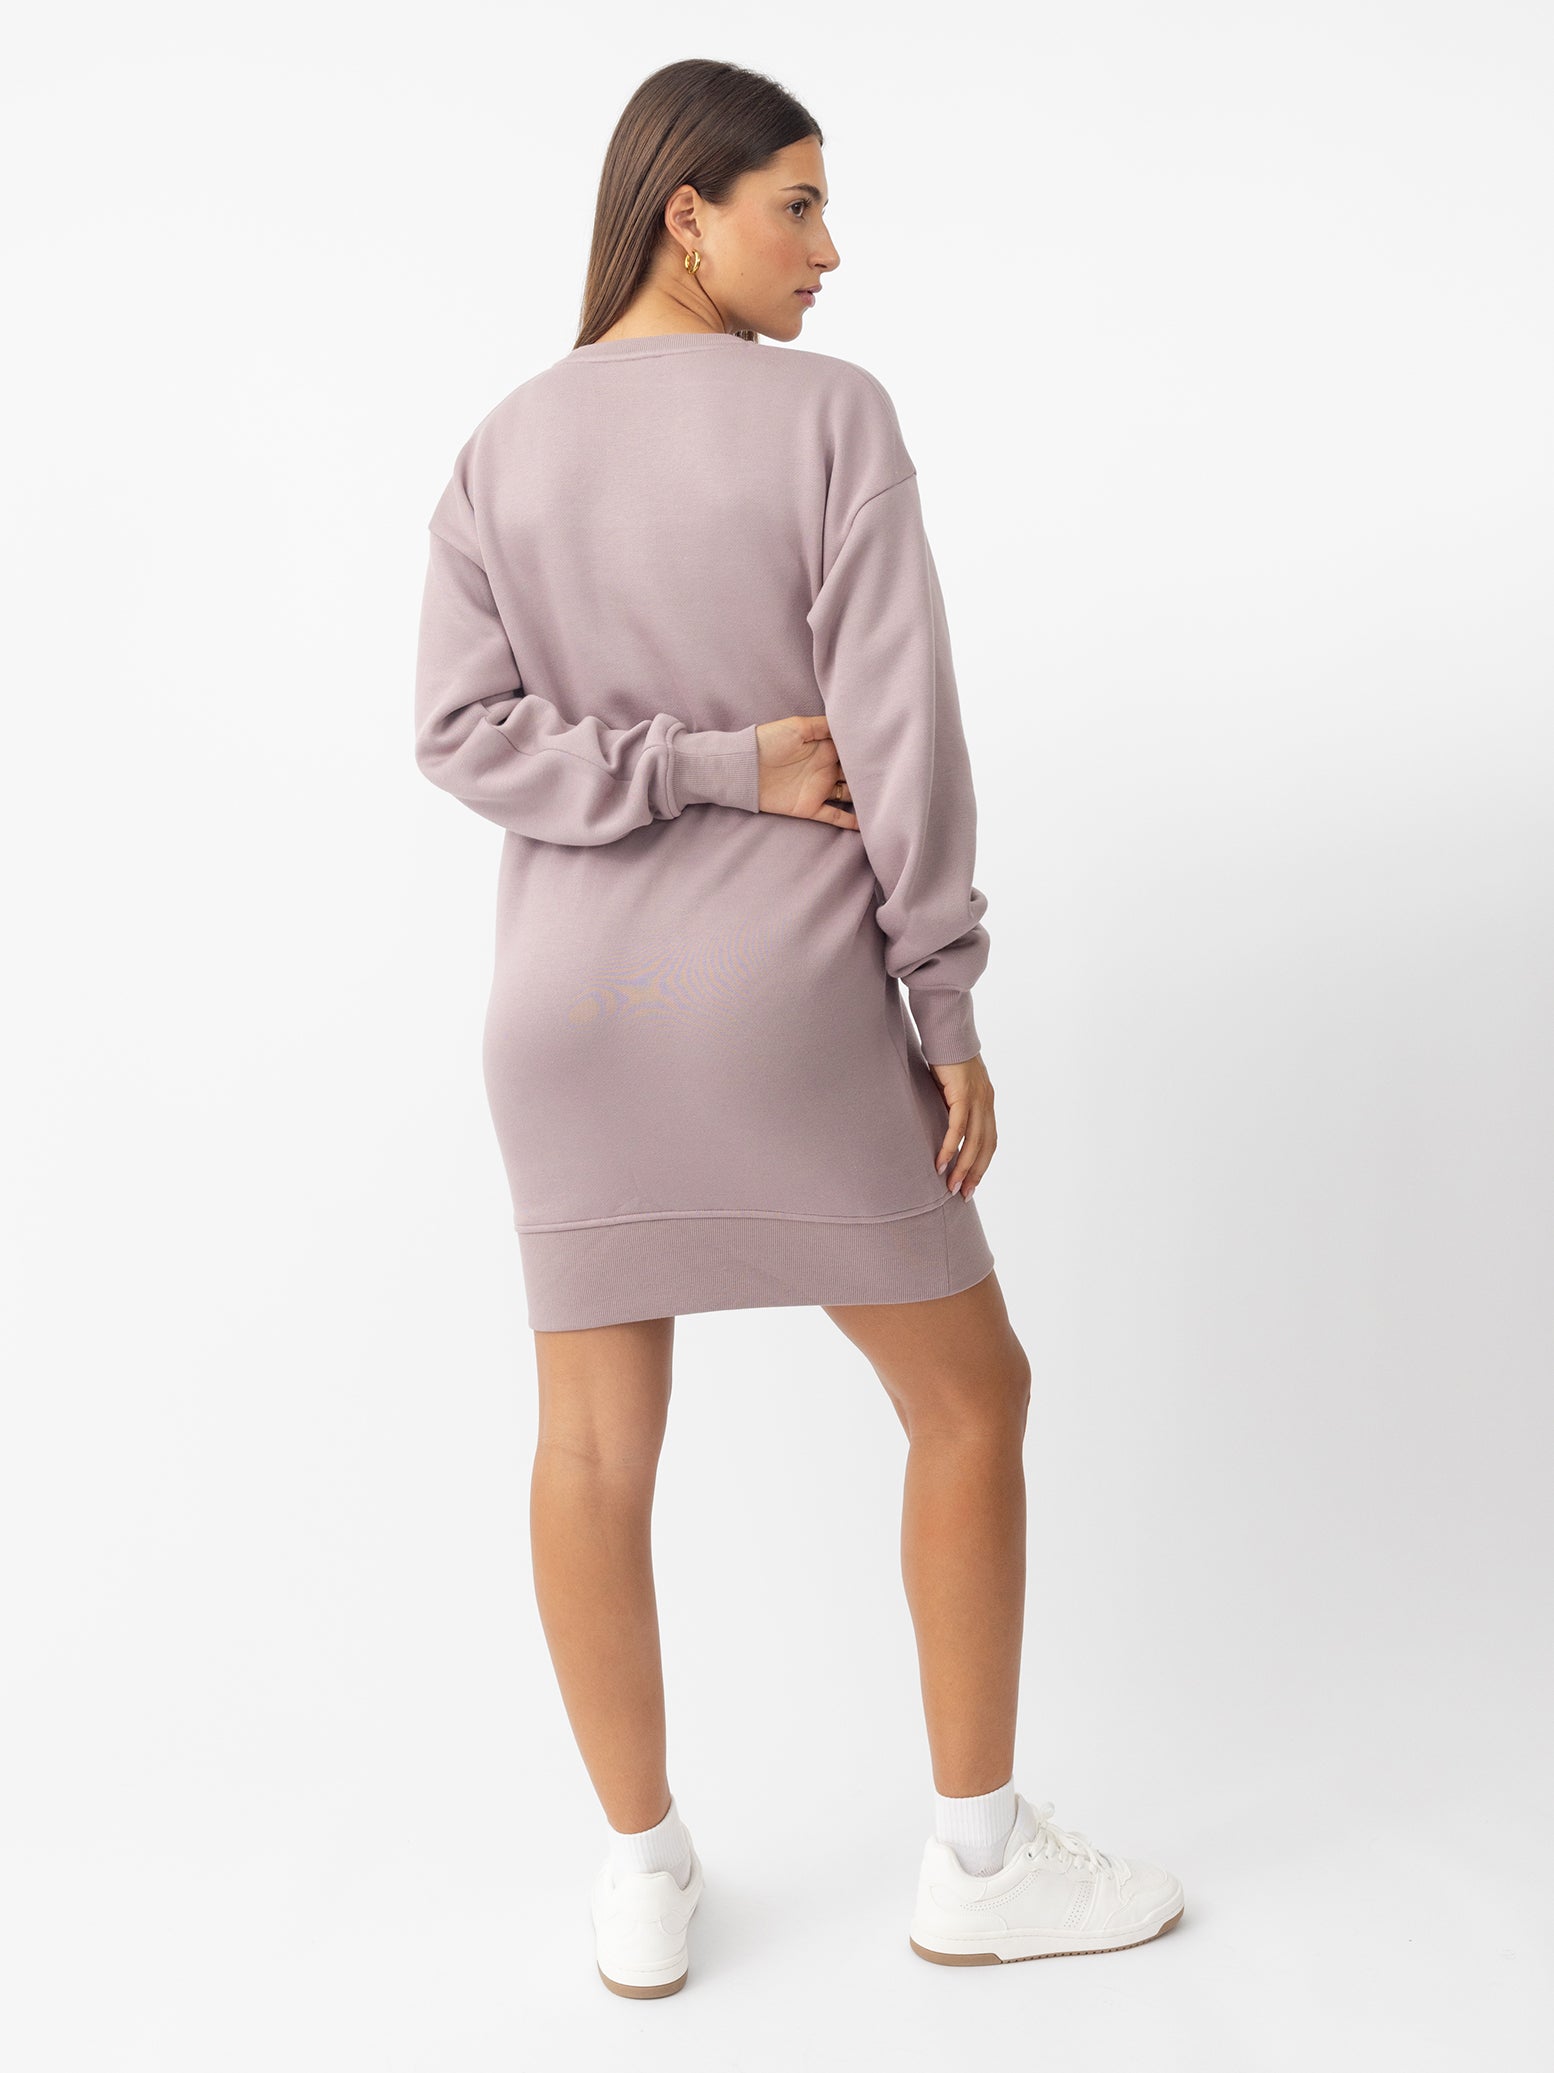 Woman wearing Dusty Orchid CityScape Crewneck Dress with white background 